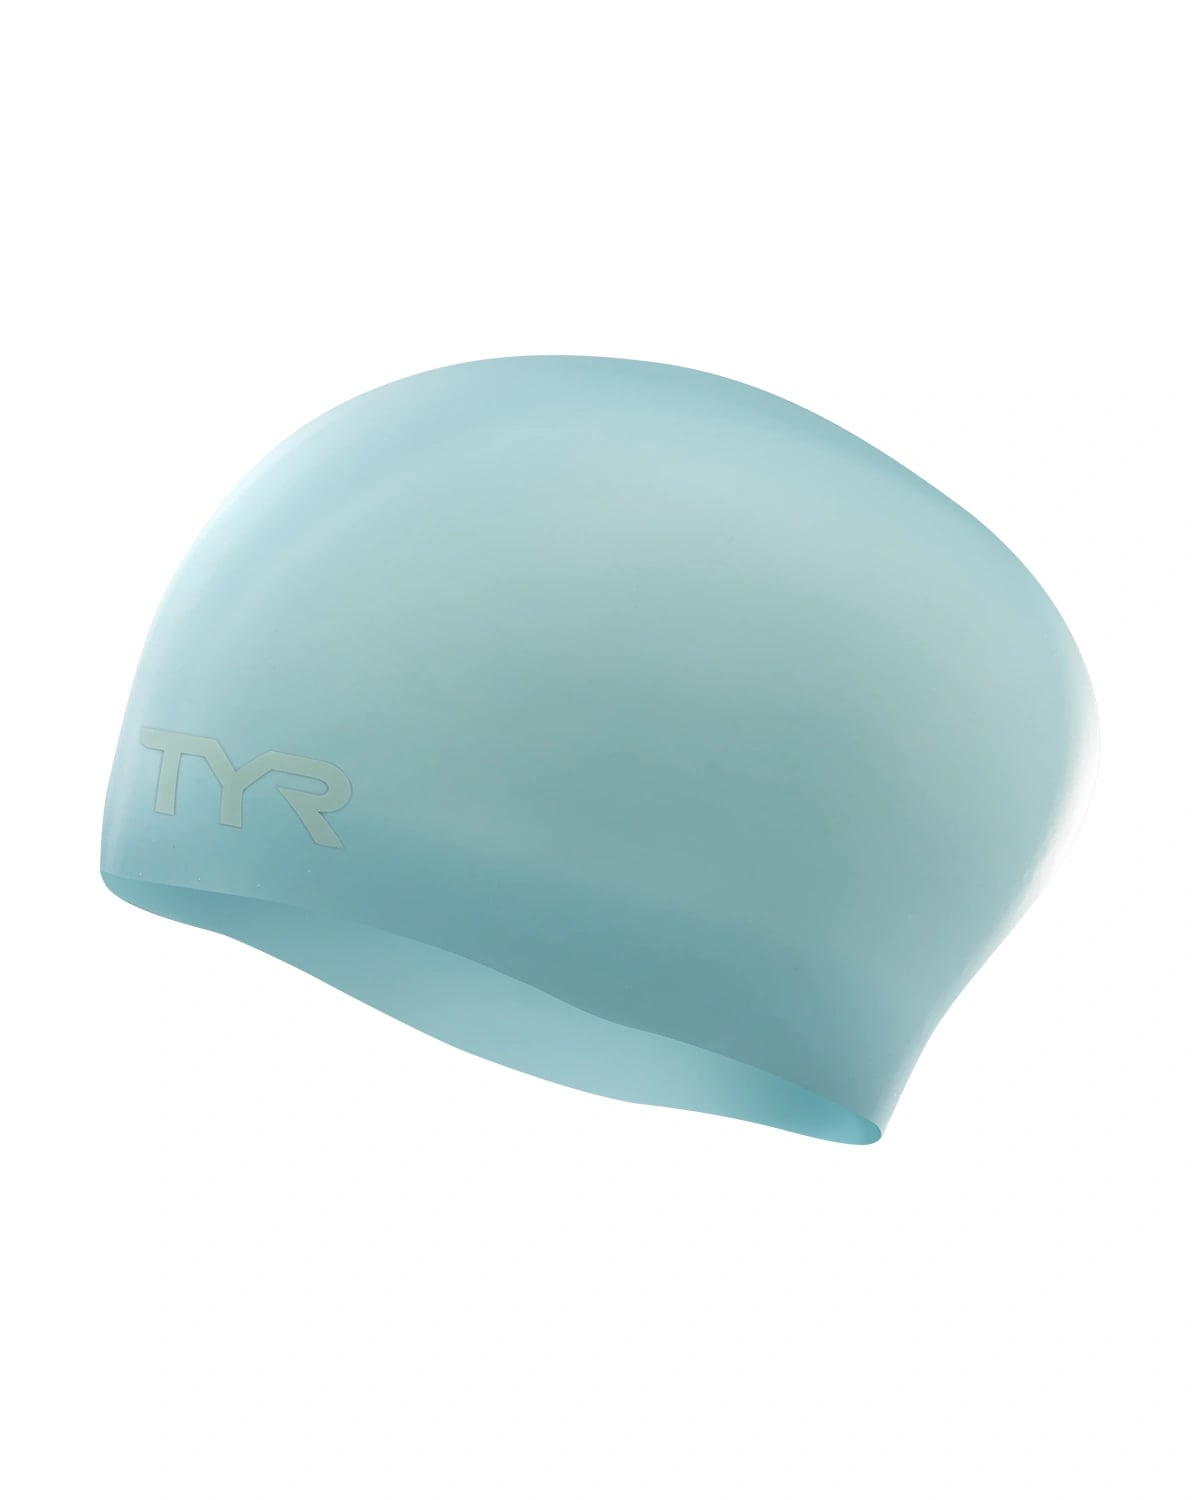 TYR Adult Long Hair Wrinkle-Free Silicone Swim Cap